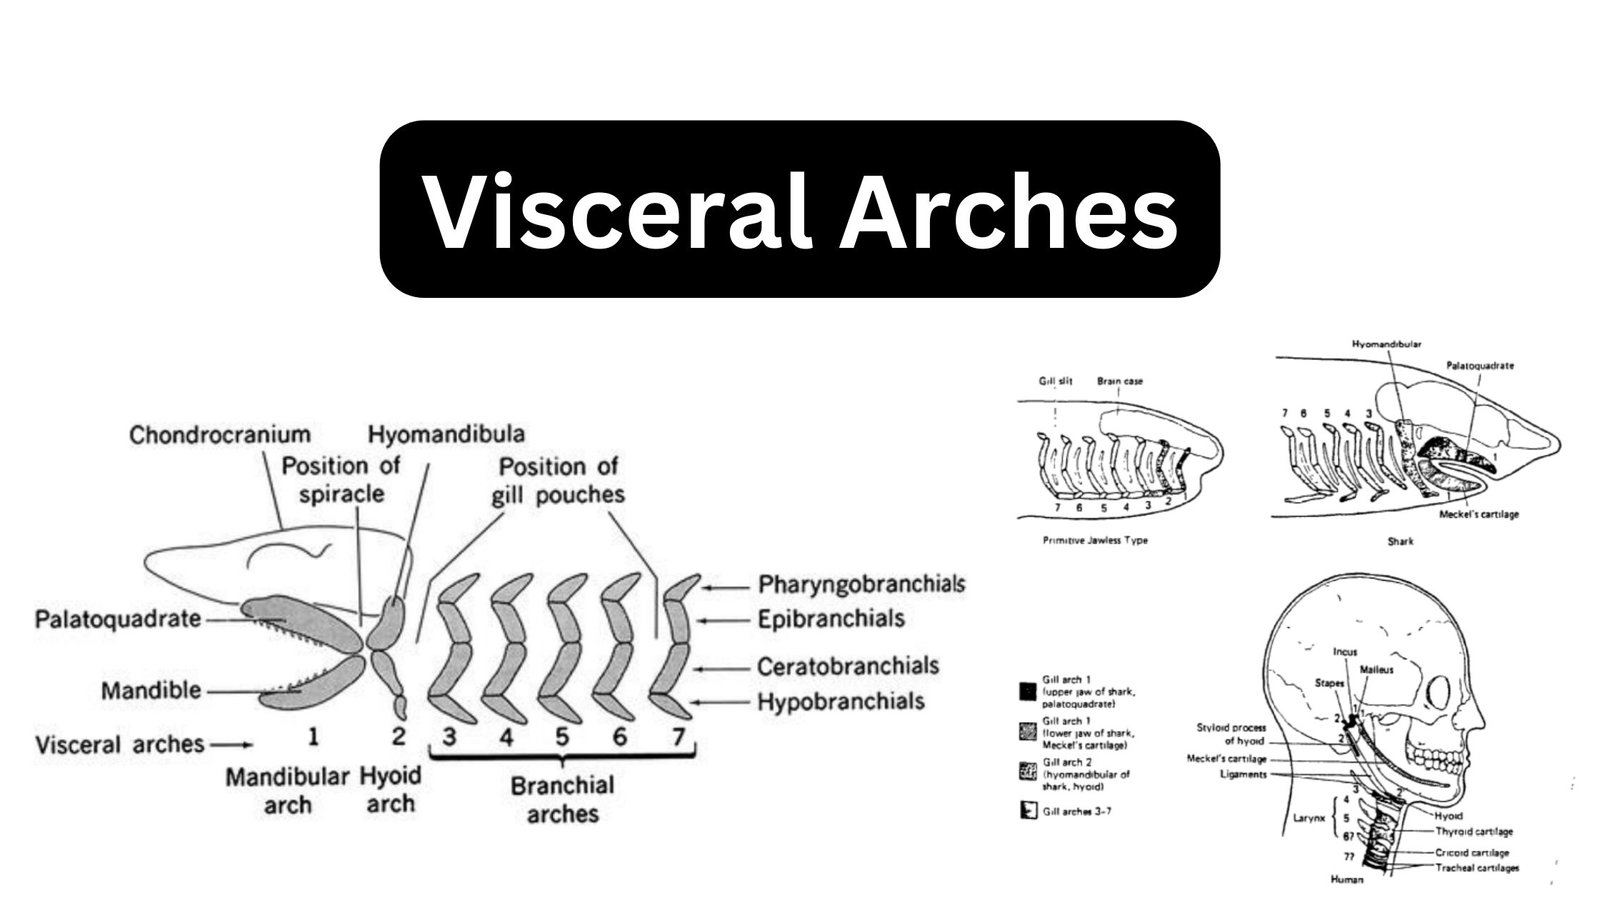 Visceral-Arches